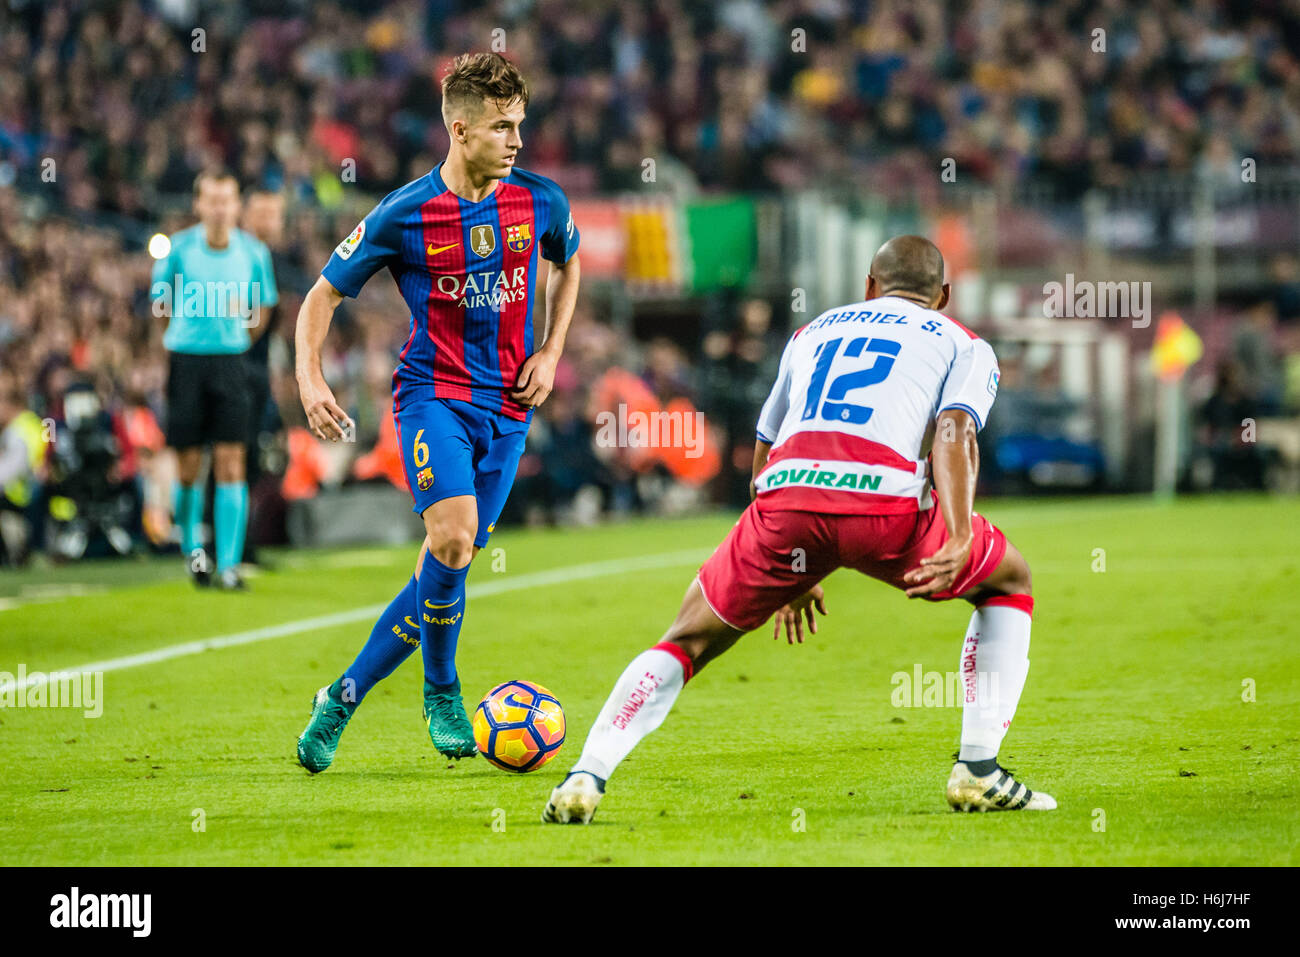 Barcelona, Catalonia, Spain. 29th Oct, 2016. FC Barcelona midfielder DENIS SUAREZ in action during the LaLiga match between FC Barcelona and Granada CF at the Camp Nou stadium in Barcelona © Matthias Oesterle/ZUMA Wire/Alamy Live News Stock Photo